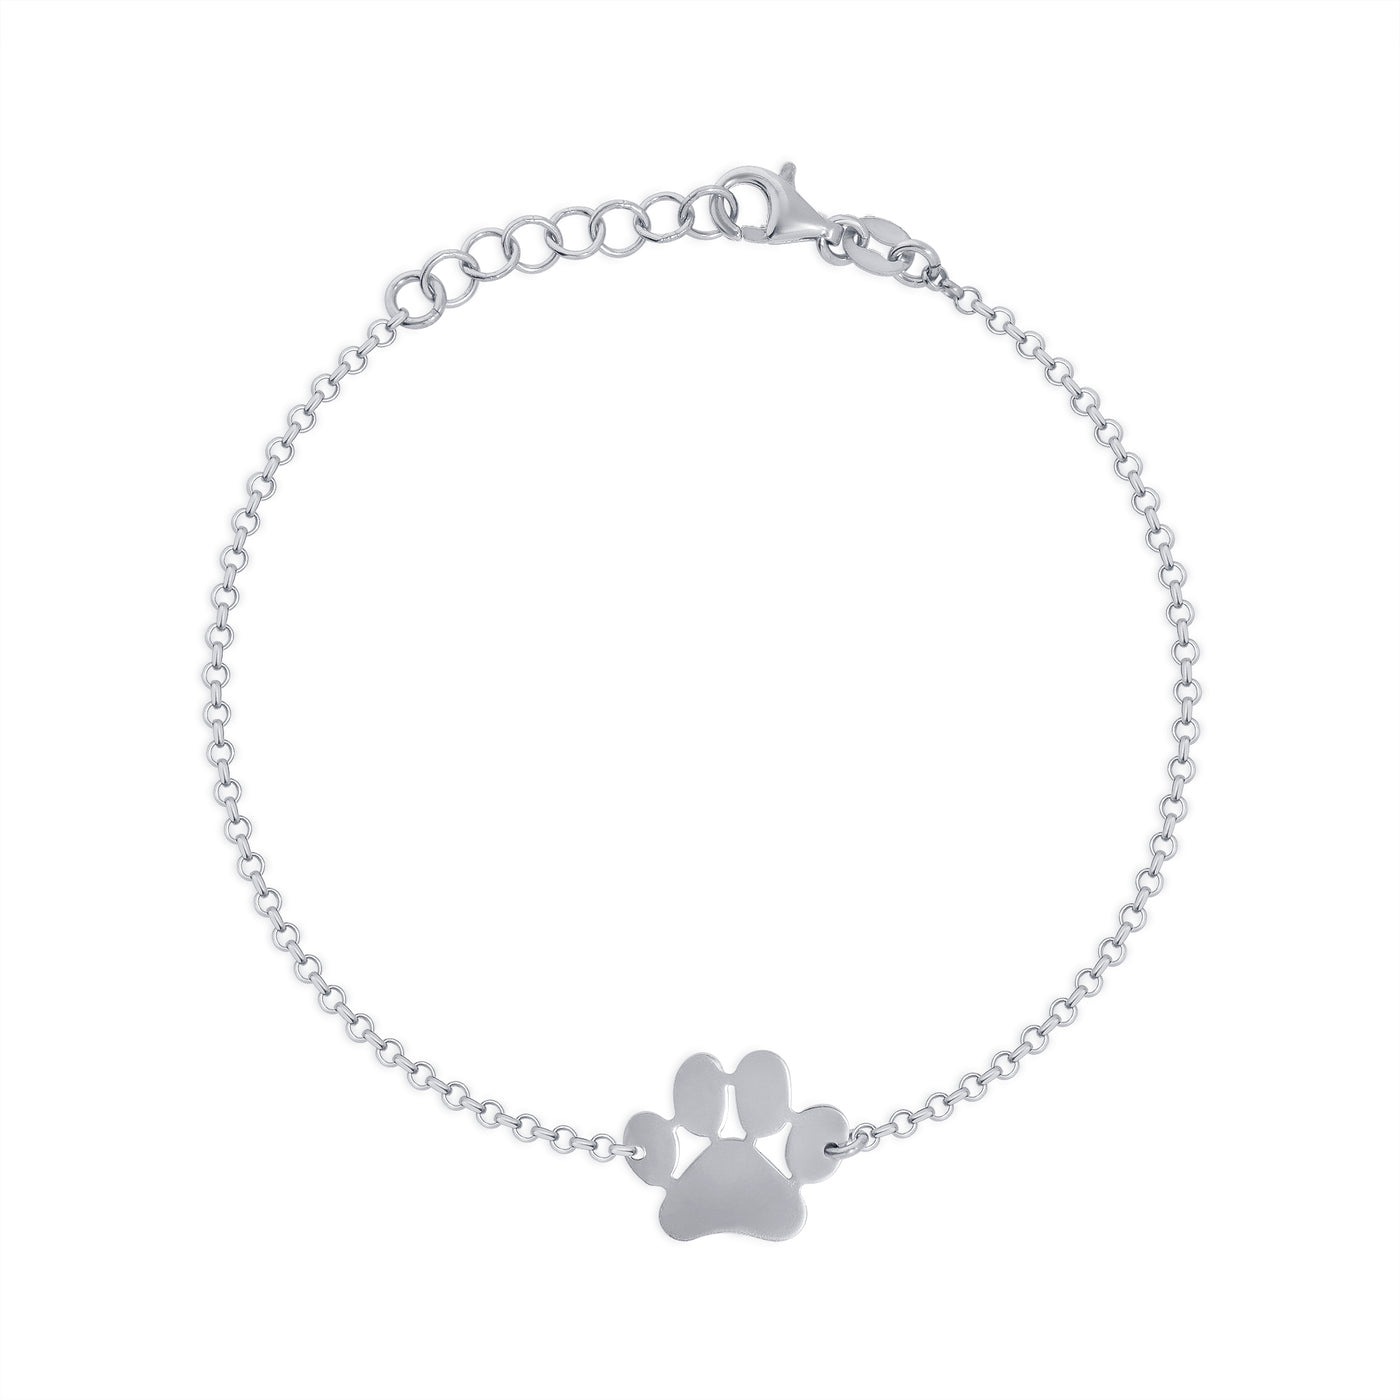 Italian Sterling Silver or Gold Plated Polished Dog Puppy Paw Charm Chain Bracelet